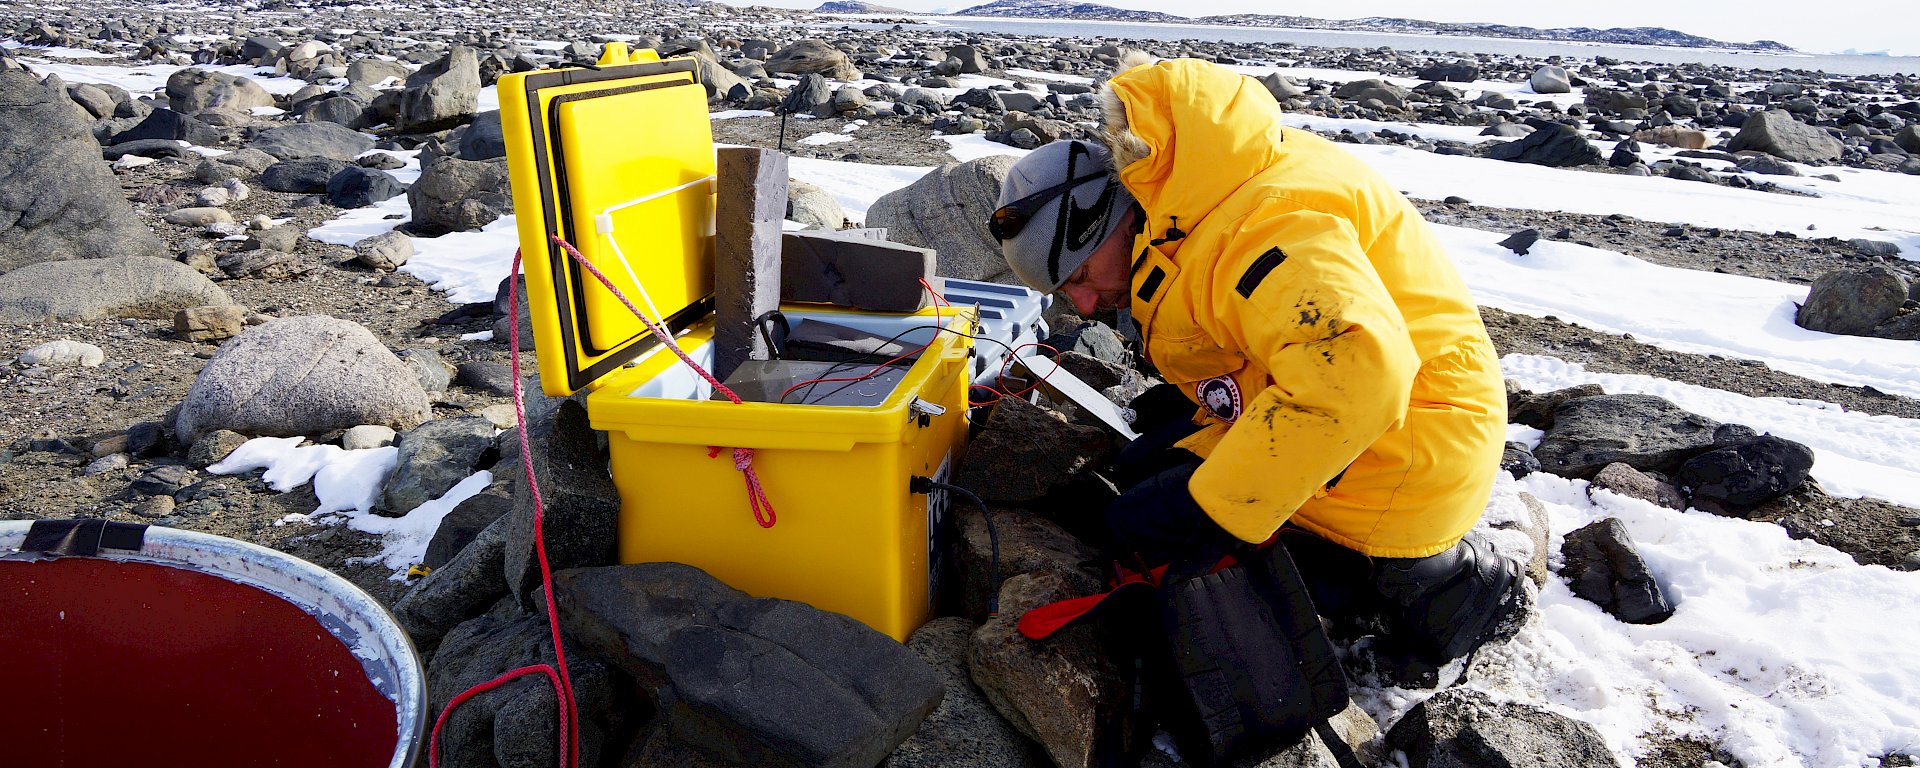 Man kneeling in front of yellow plastic box adjusting electronics equipment, on snow and rock covered ground.